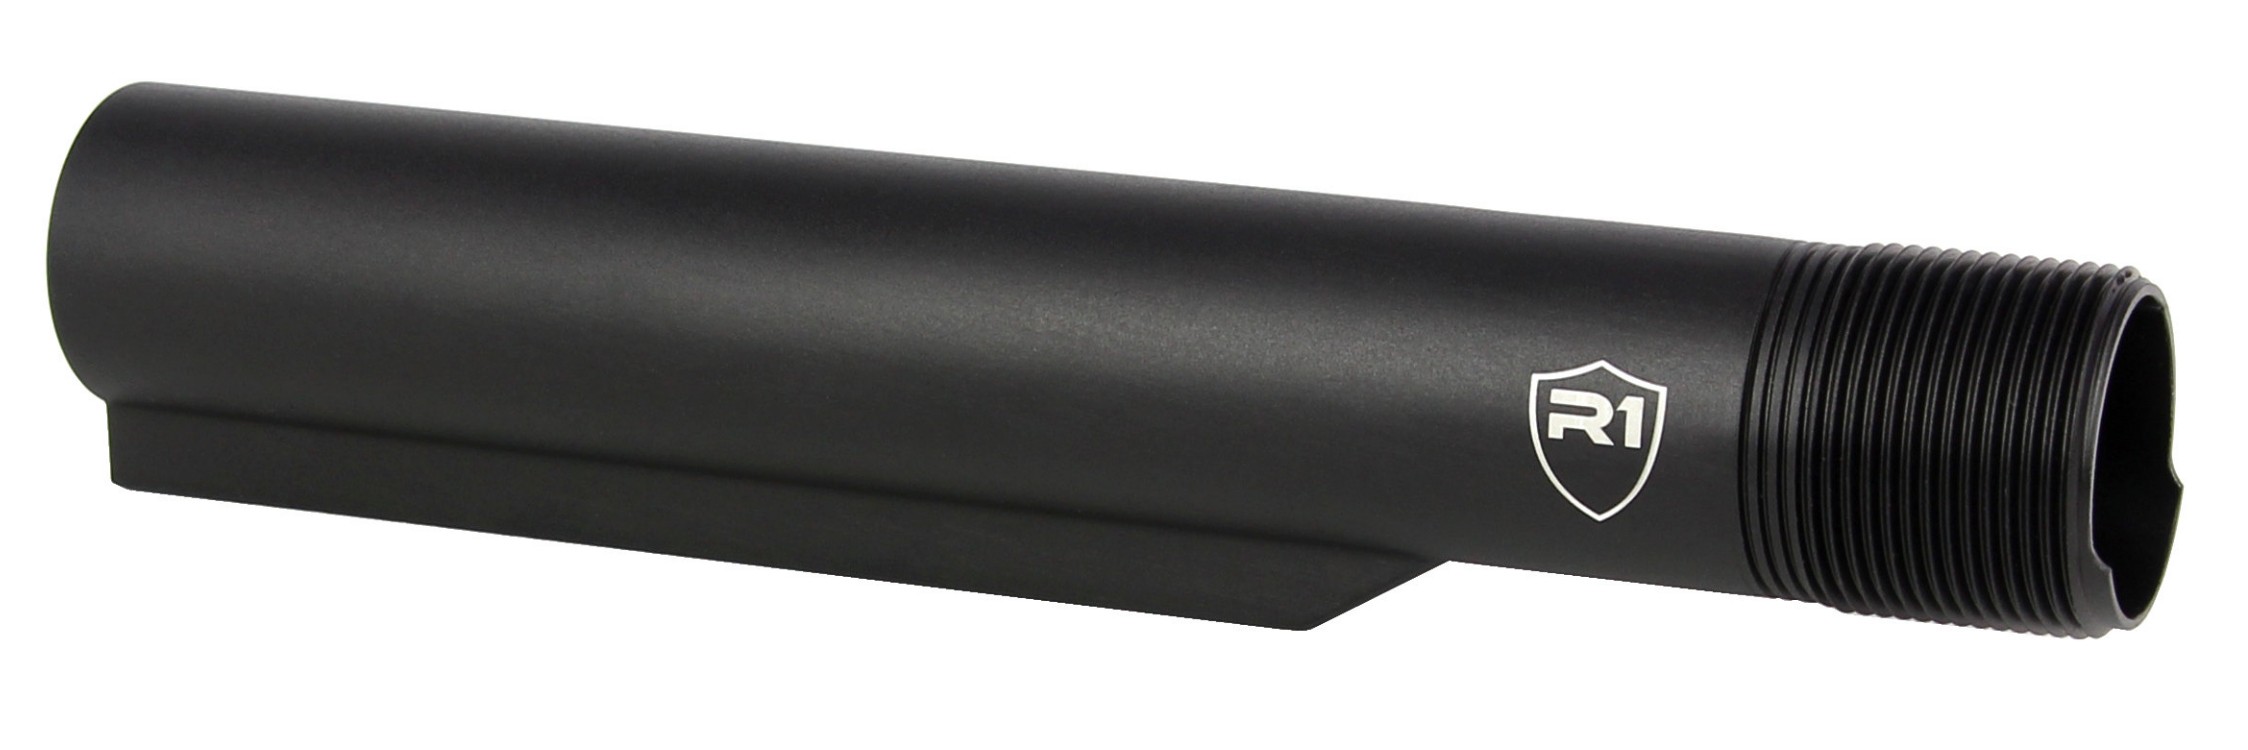 R1 Tactical Mil-Spec Buffer Tube Extension Black Anodized (R1 Shield) - Redcon1 Tactical